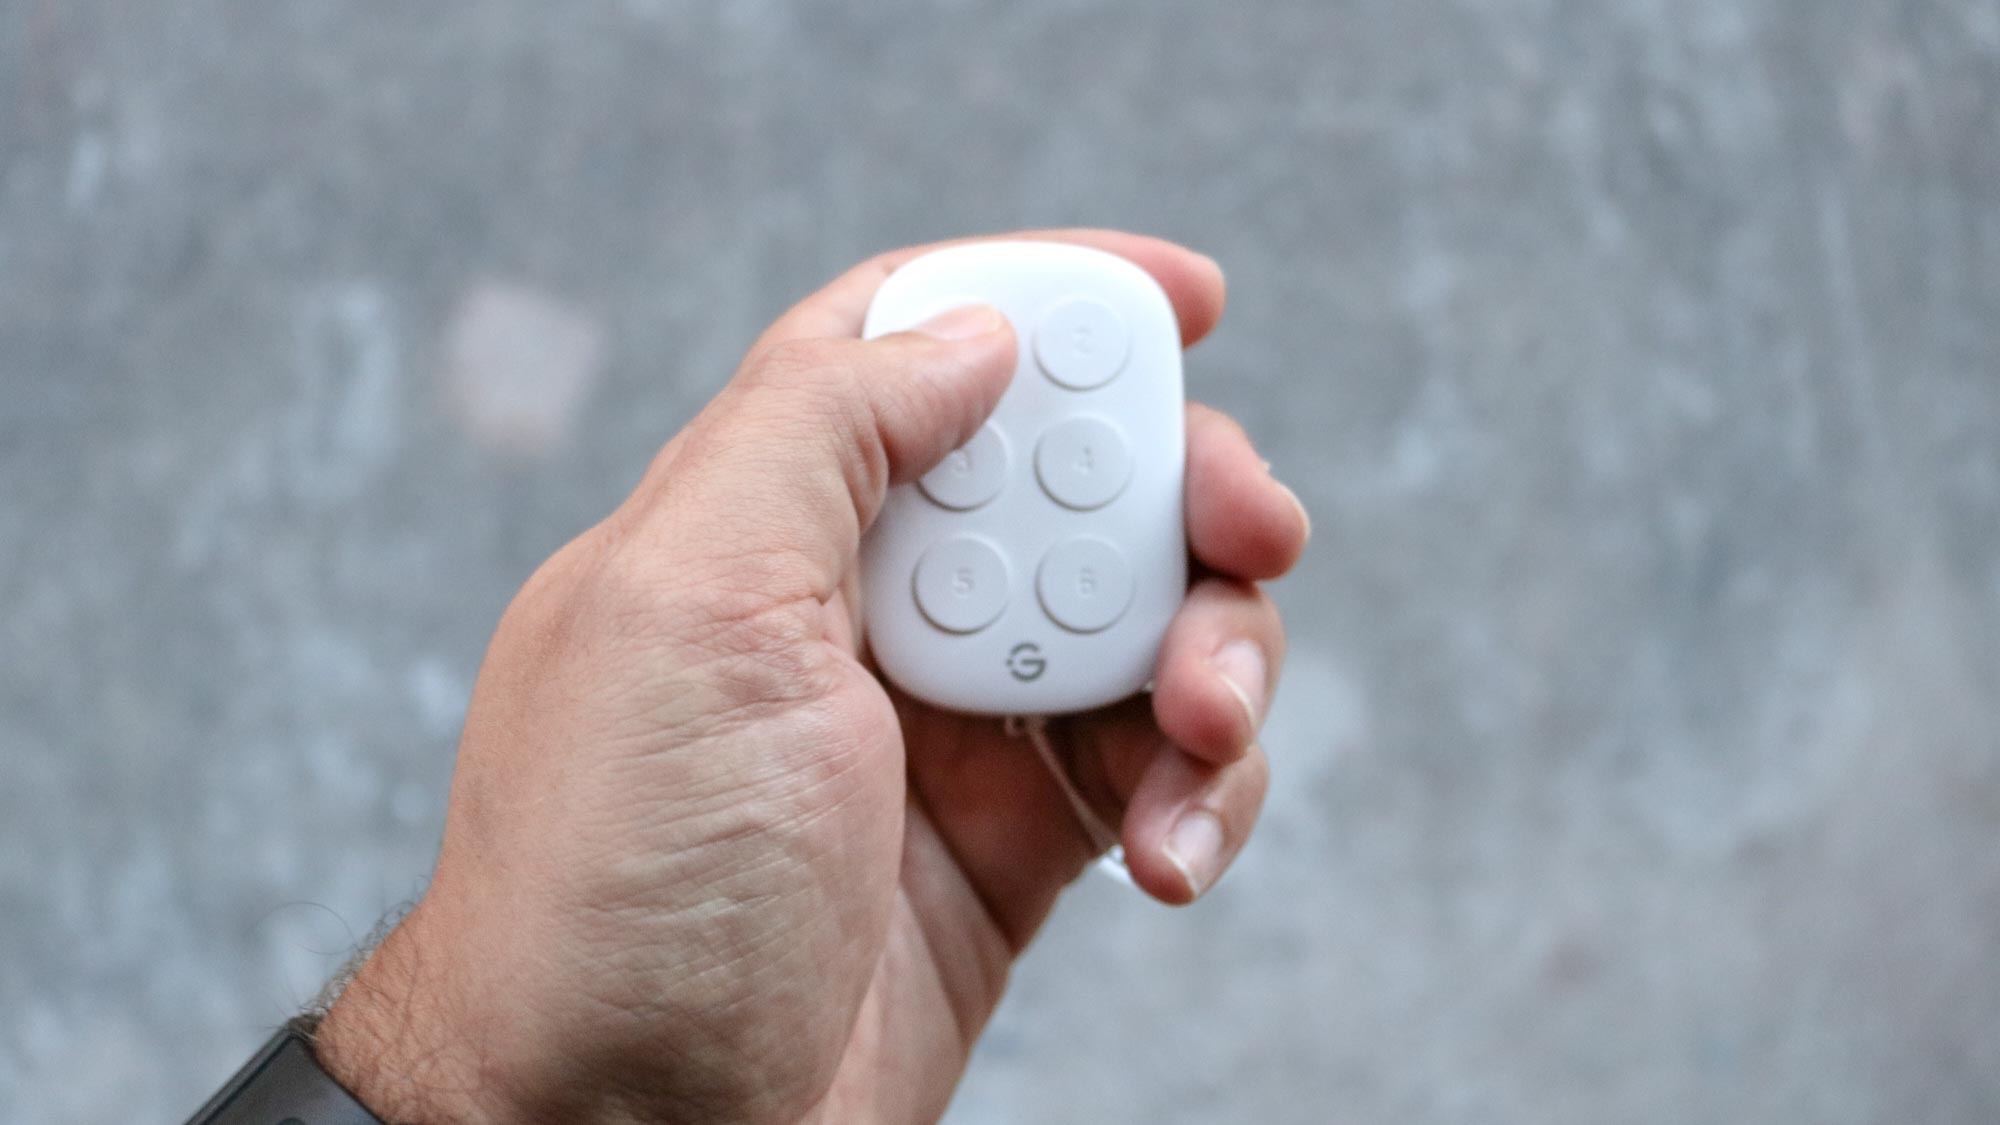 The Govee Smart Button Sensor in hand